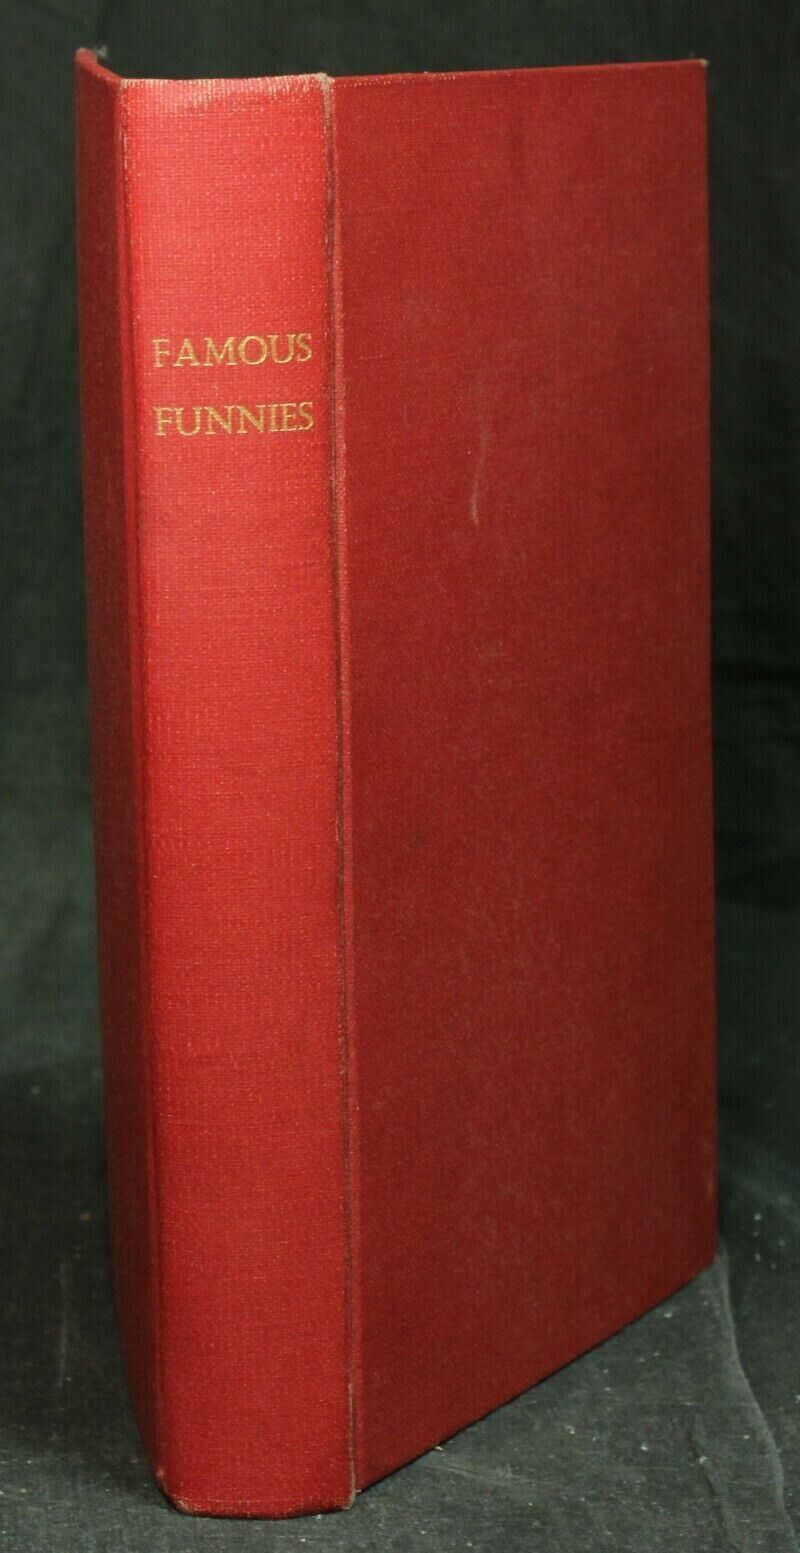 Famous Funnies Hardcover Issues #130, #131-137, #139-142